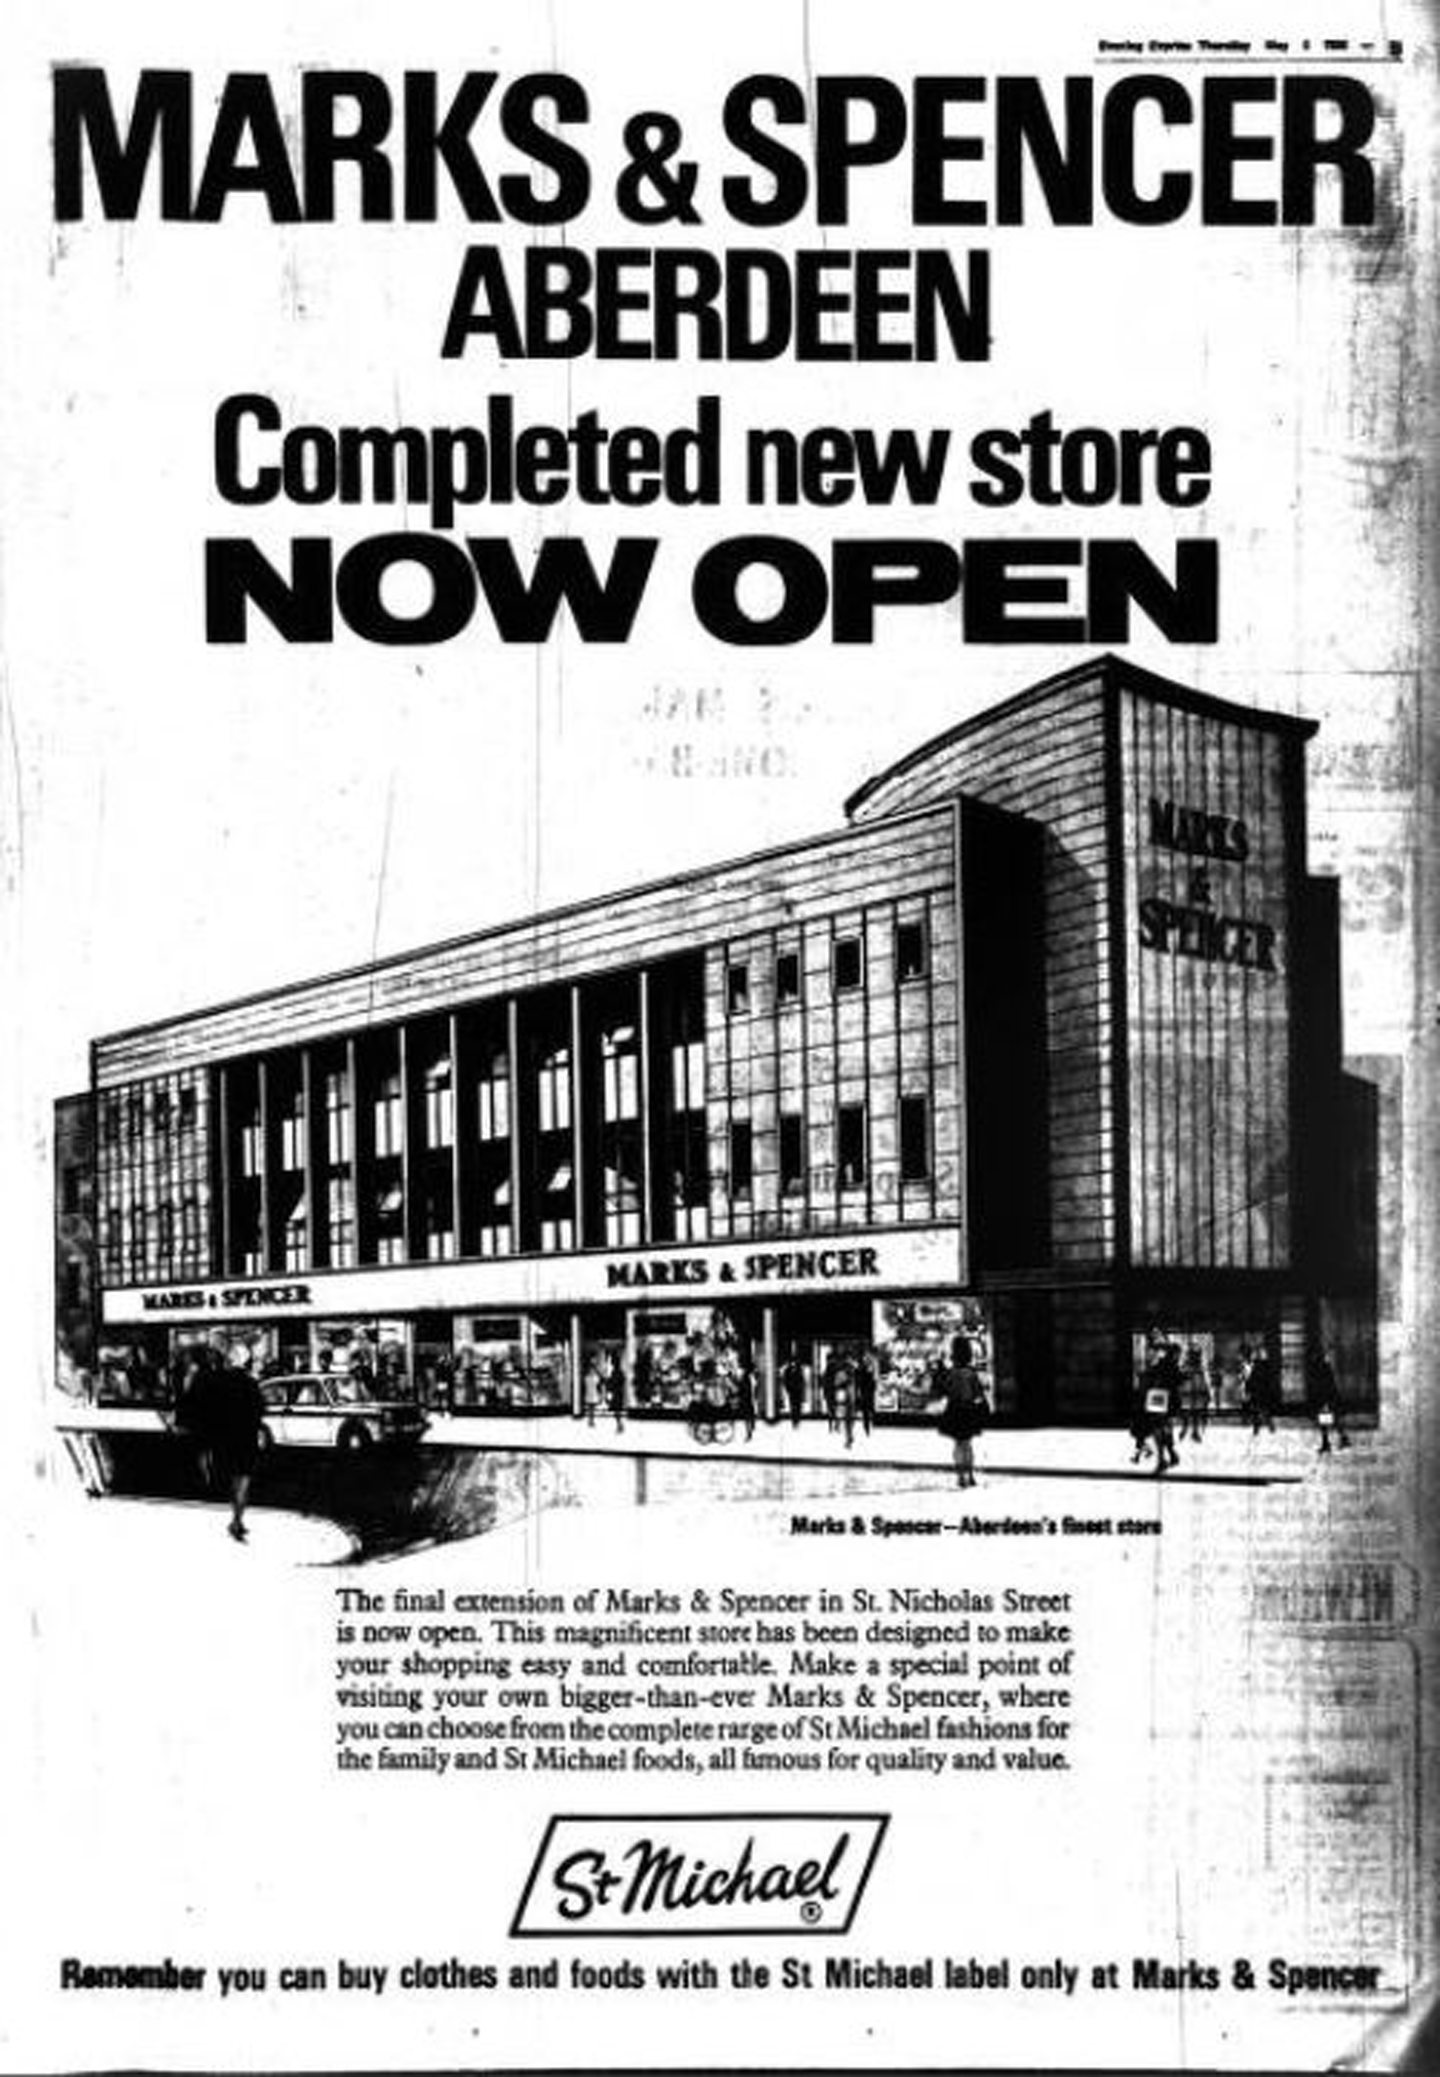 An advert in the paper reading "Marks & Spencer Aberdeen Completed new store now open"